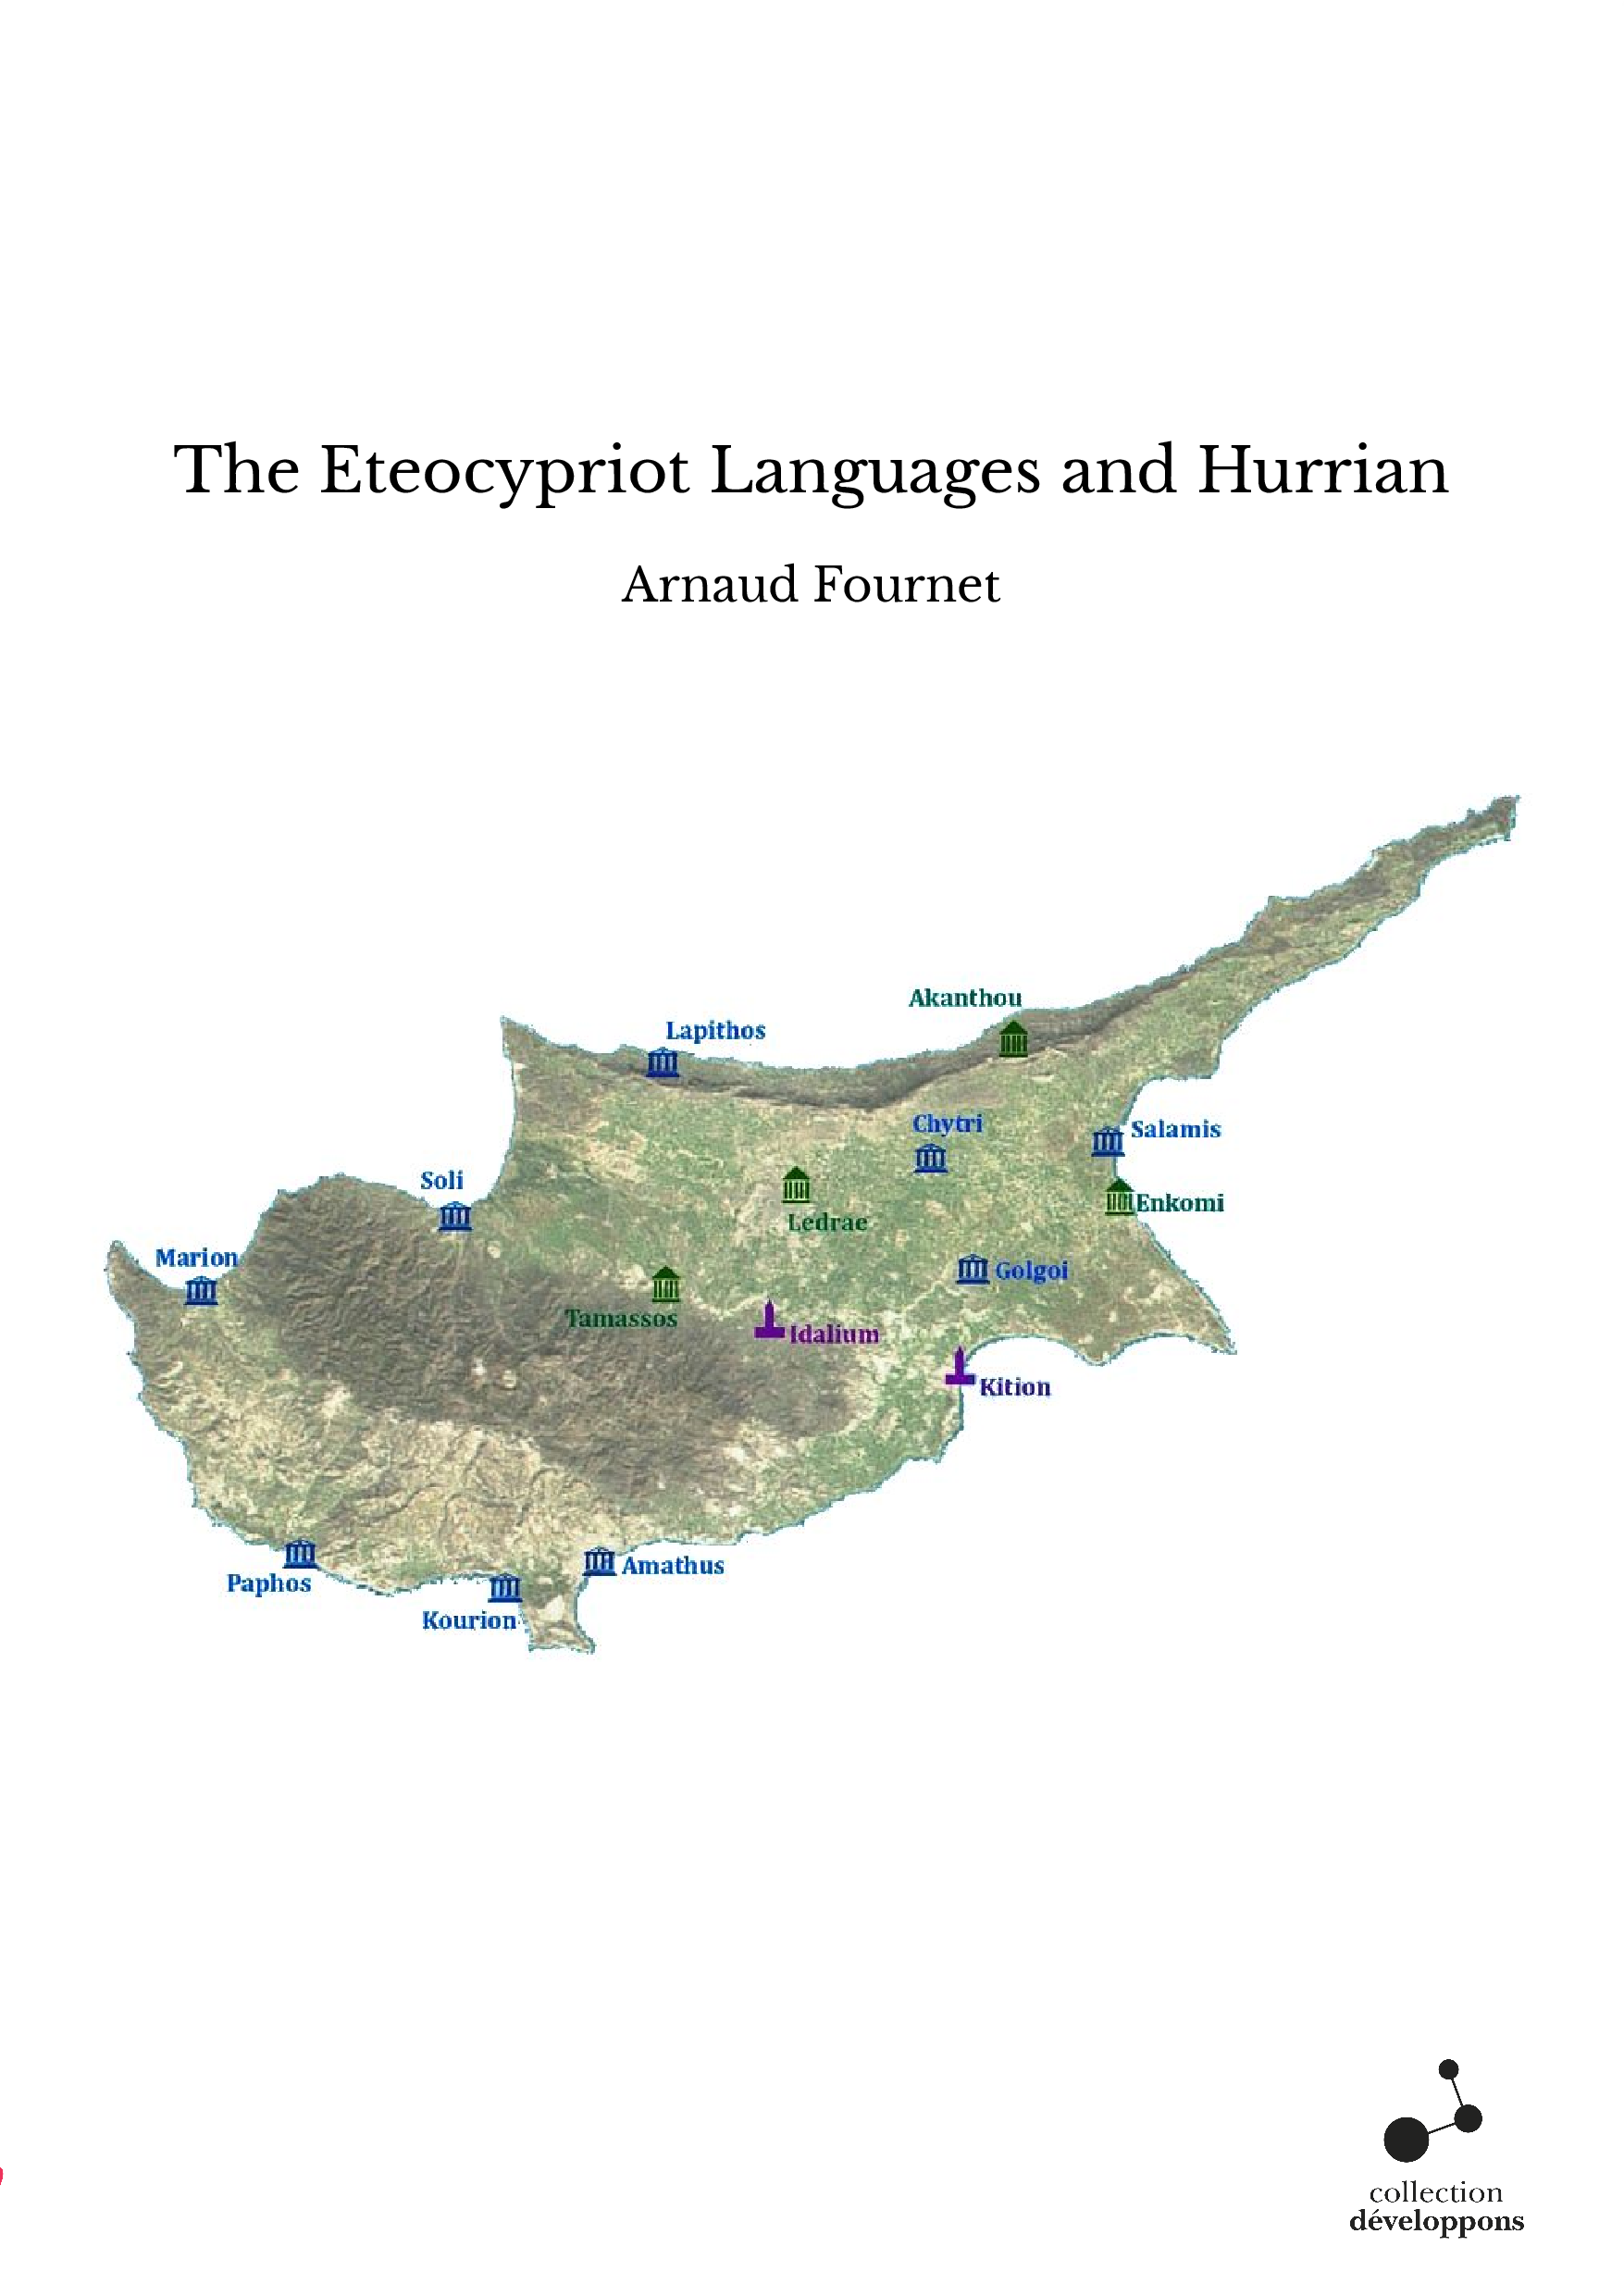 The Eteocypriot Languages and Hurrian